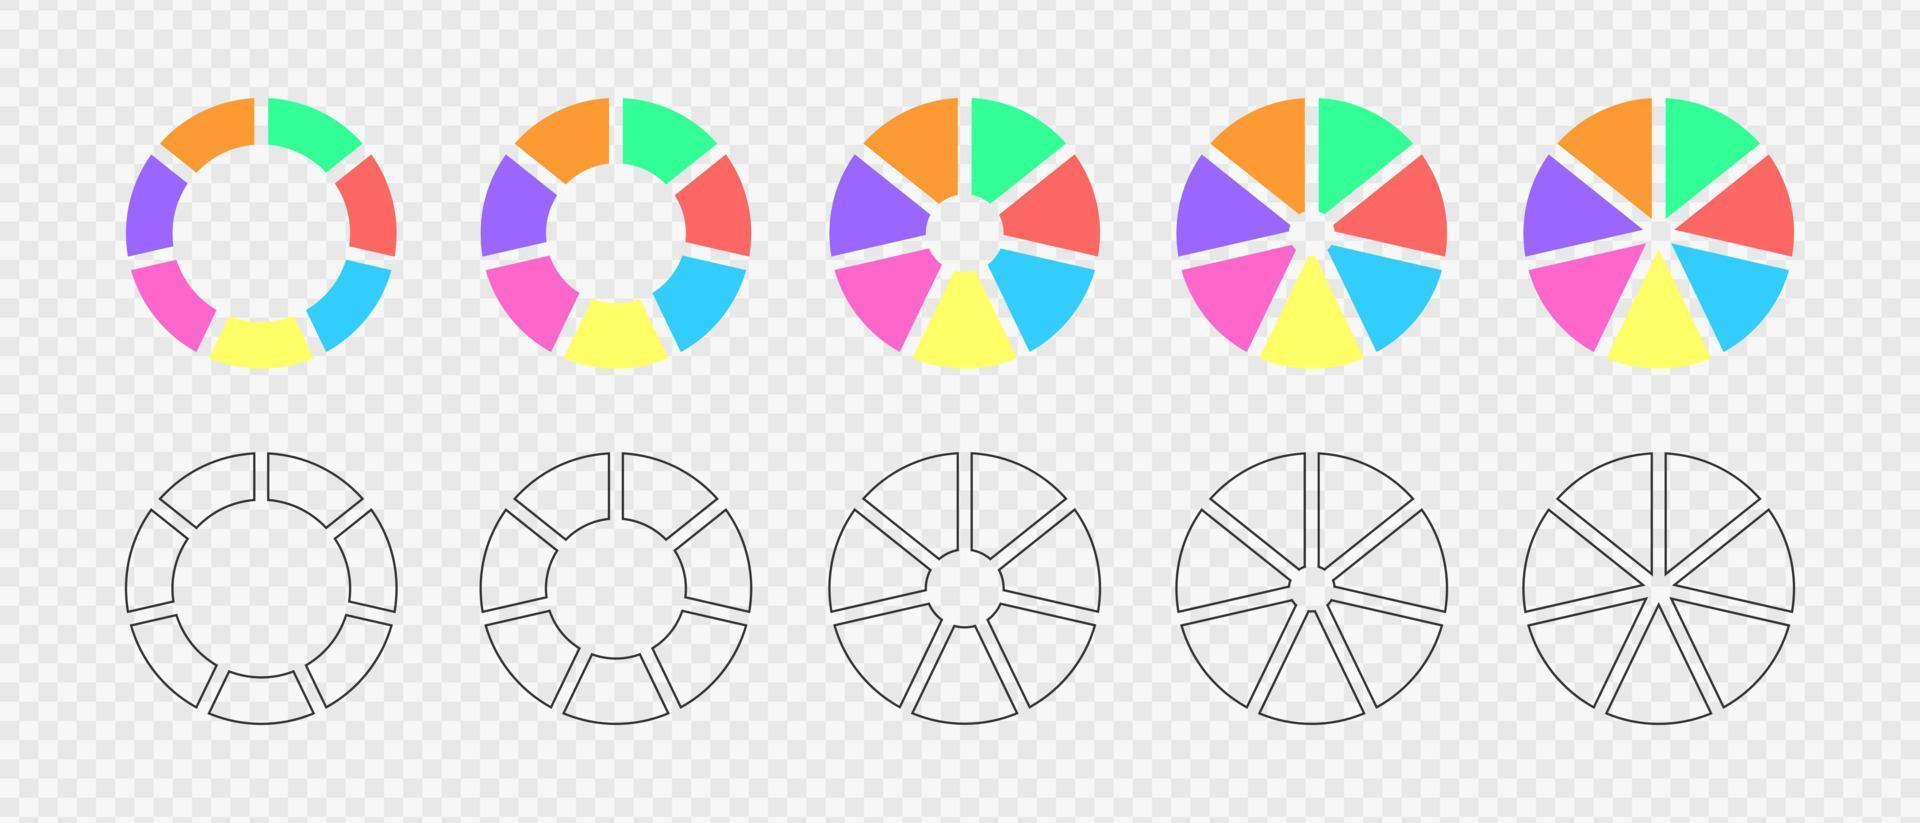 Donut charts divided in 7 multicolored and graphic segments. Infographic wheels set. Round diagrams or loading bars cut in seven equal parts vector